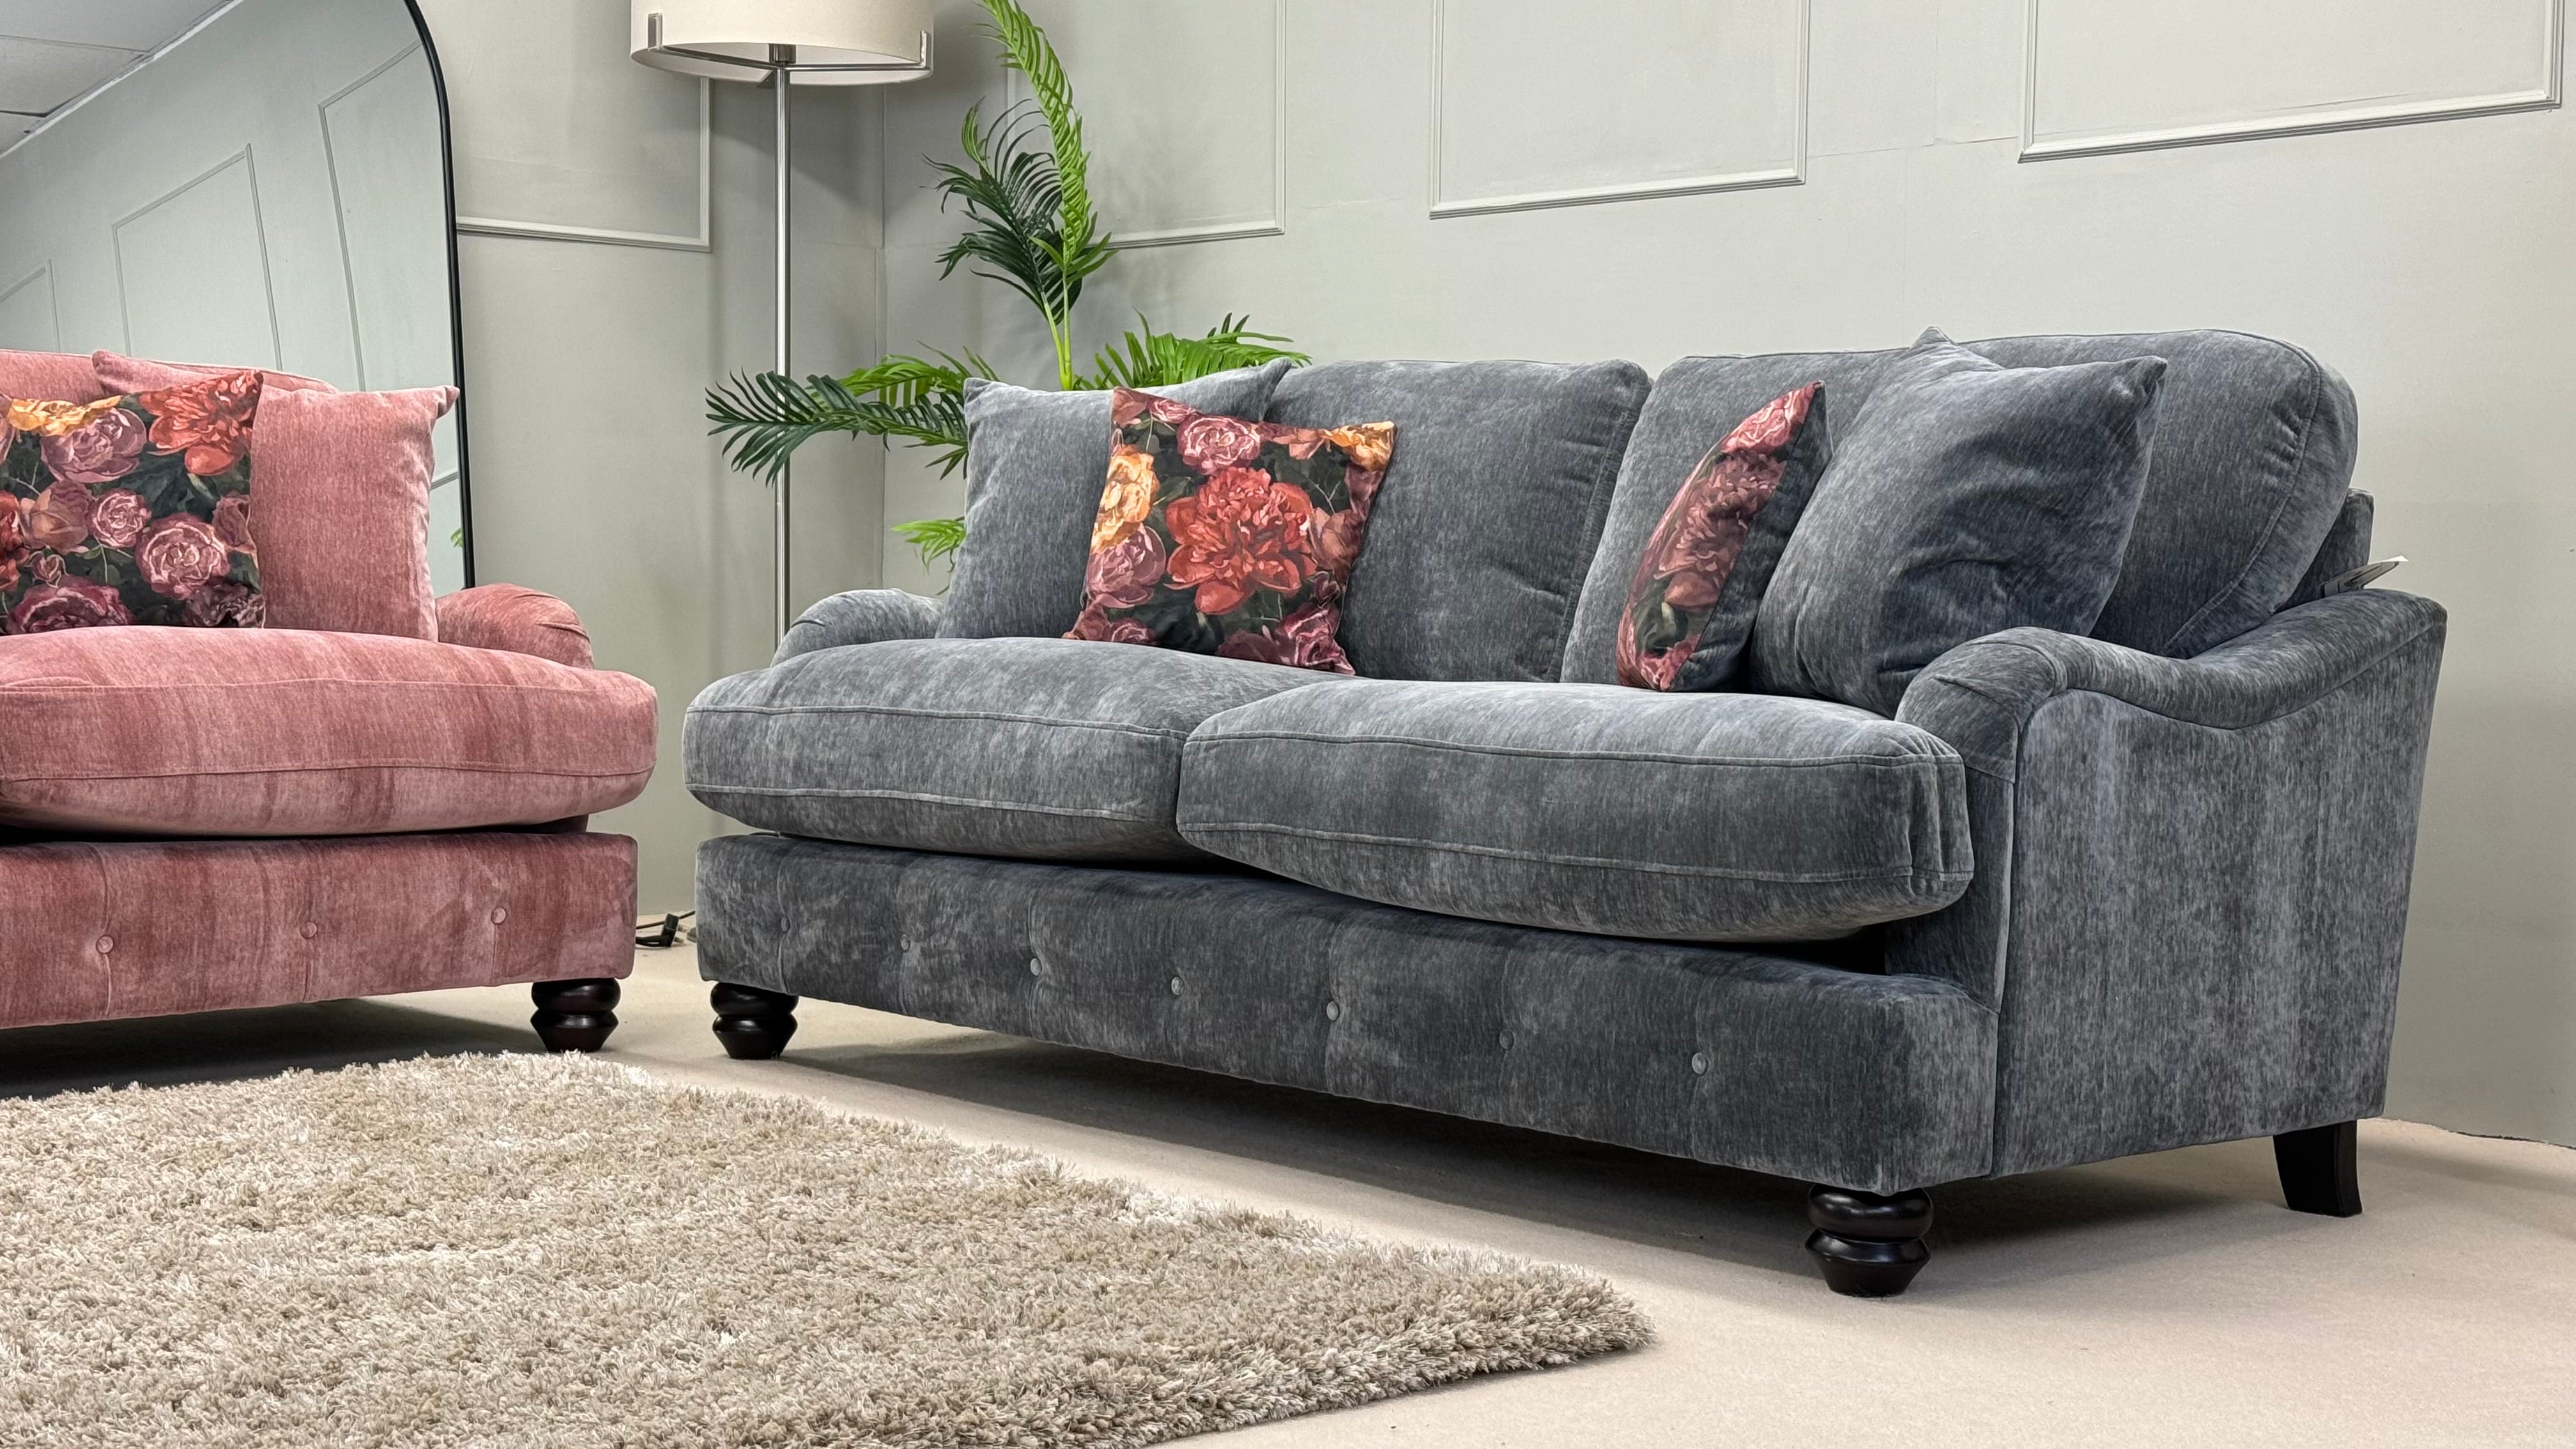 Mable 3 & 2 Seater Charcoal & Rose pink Fabric Sofa Set